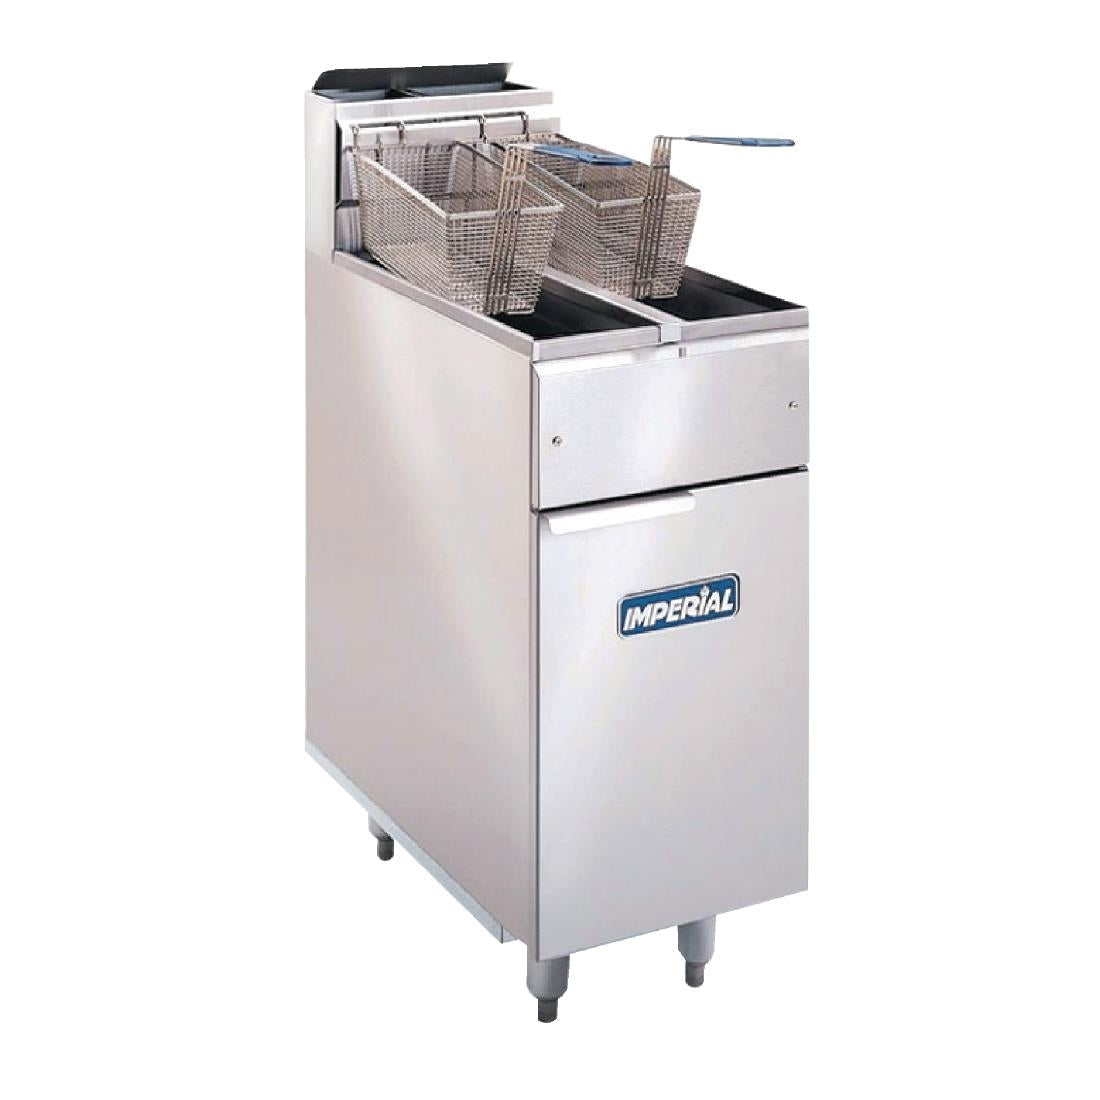 CB098-P Imperial Twin Tank Twin Basket Free Standing Propane Gas Fryer IFS-2525 JD Catering Equipment Solutions Ltd